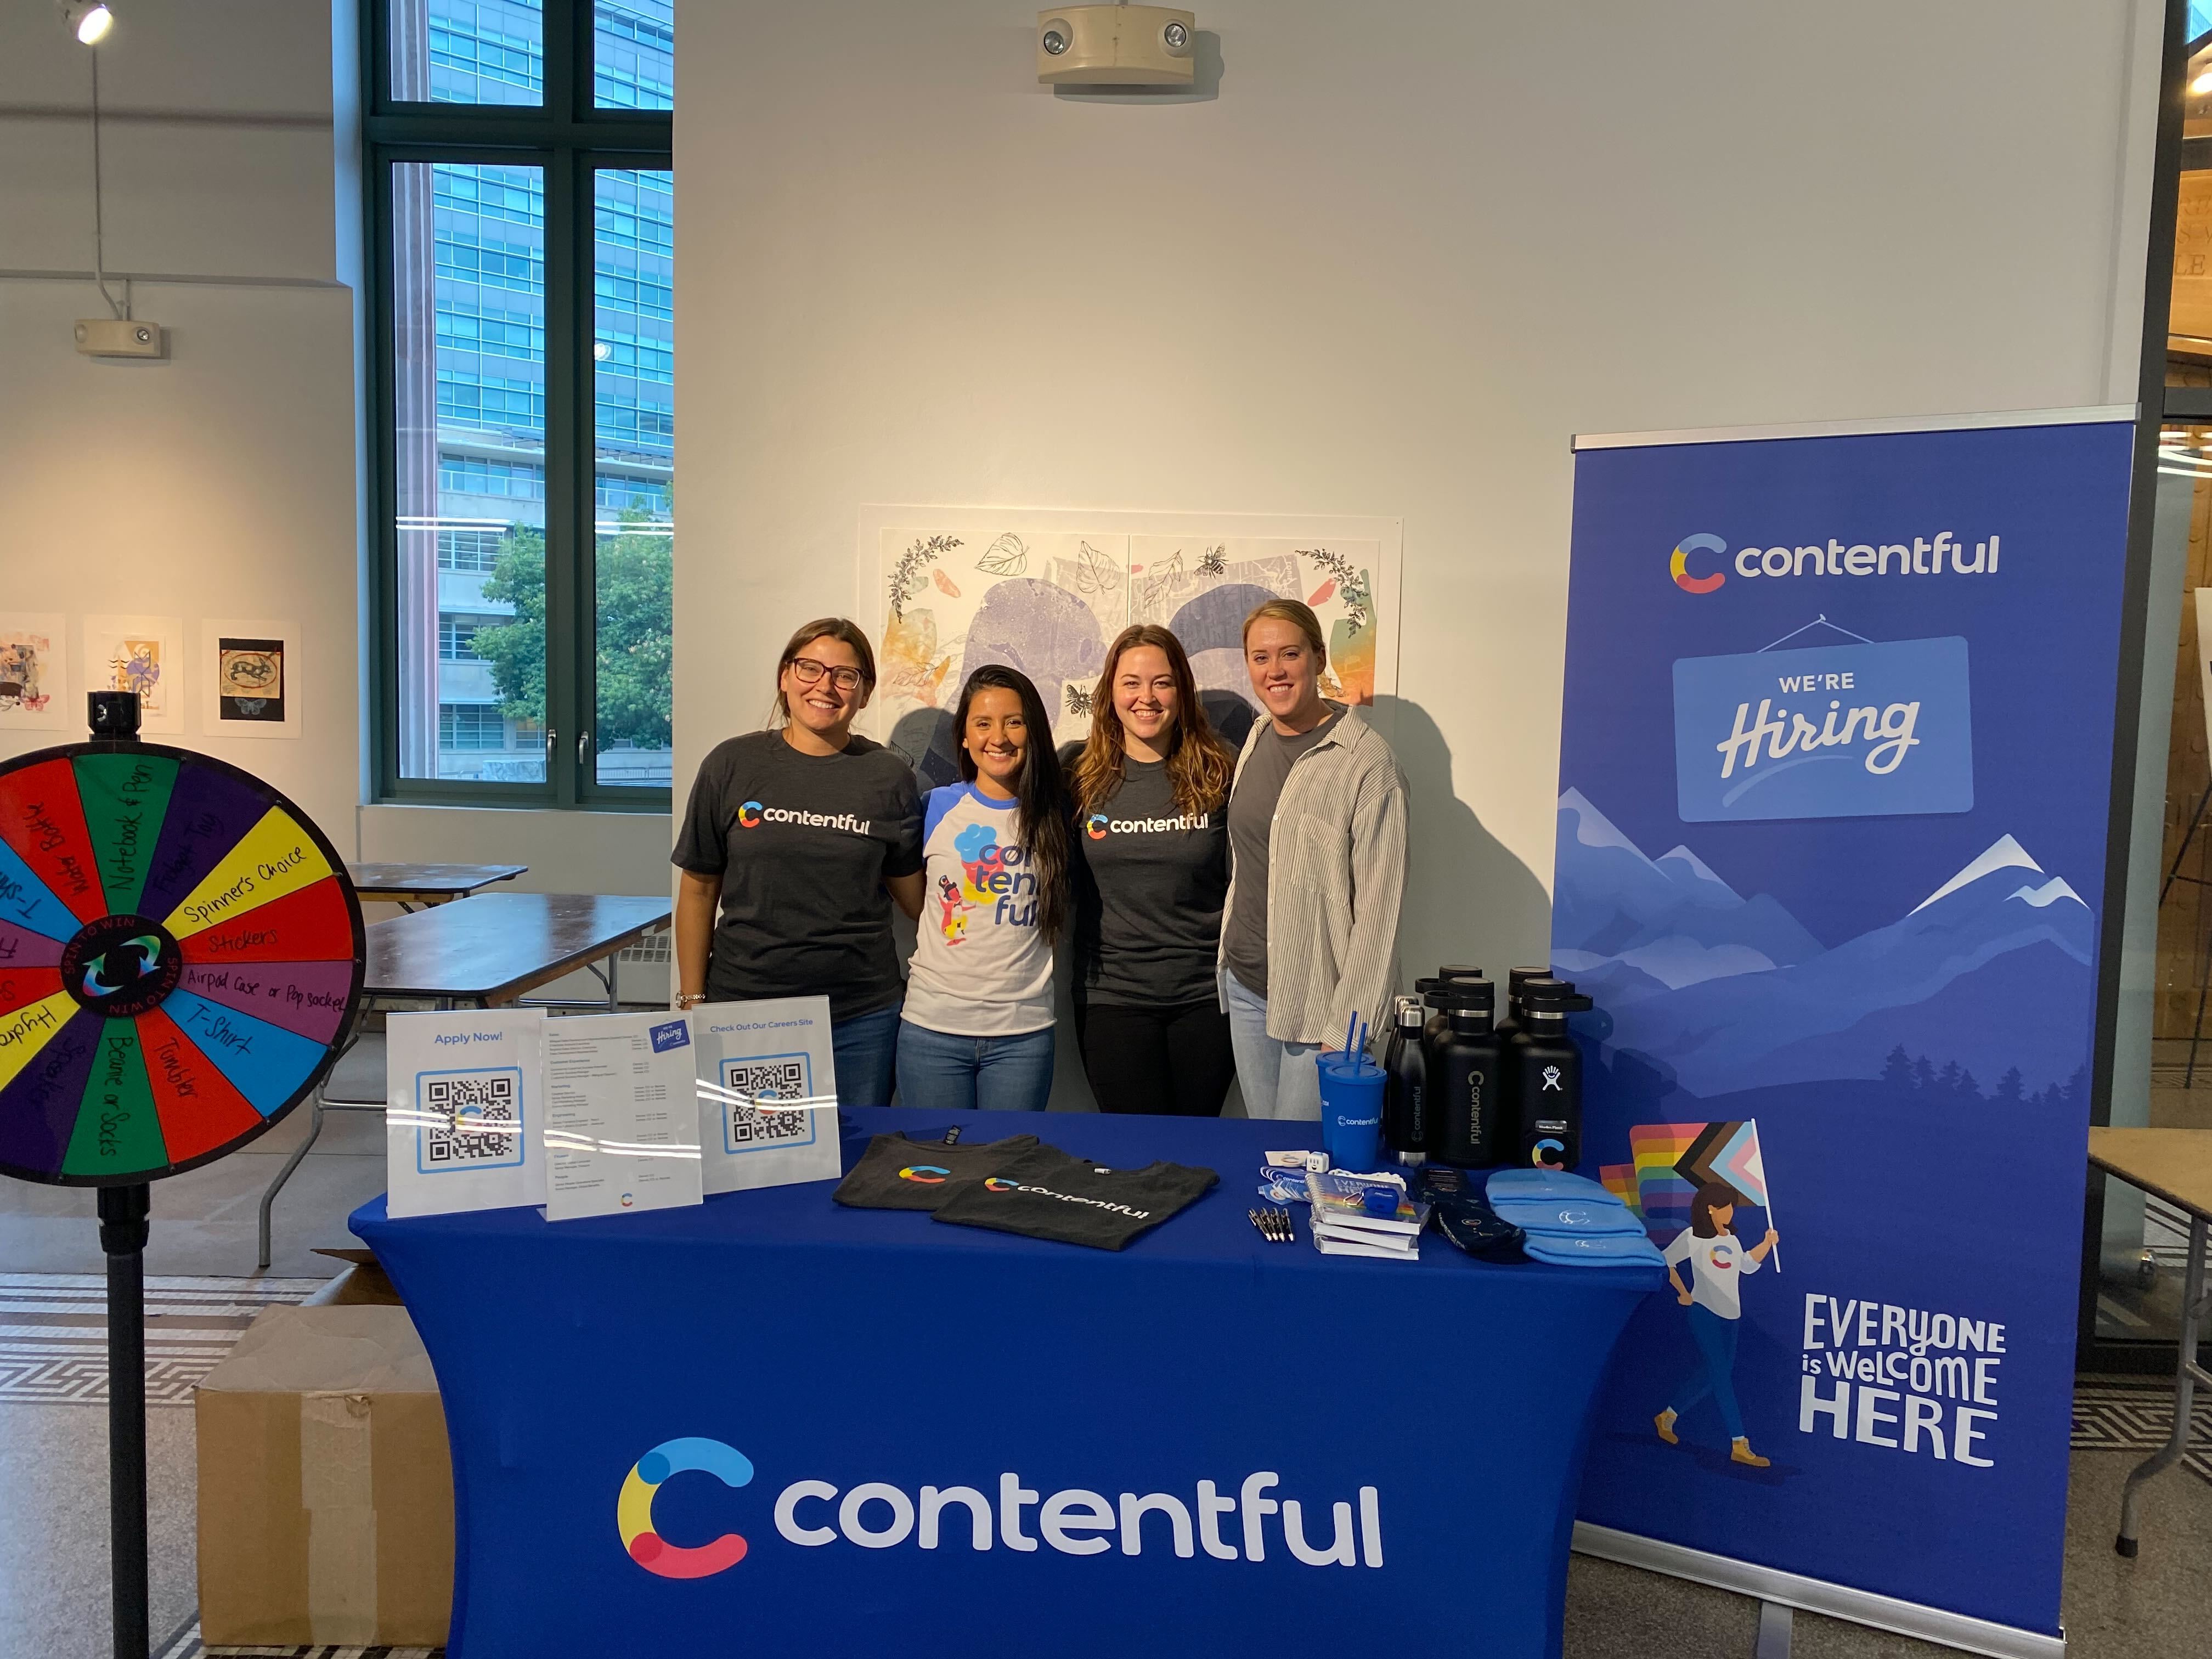 A group of Contentful employees during a company event.